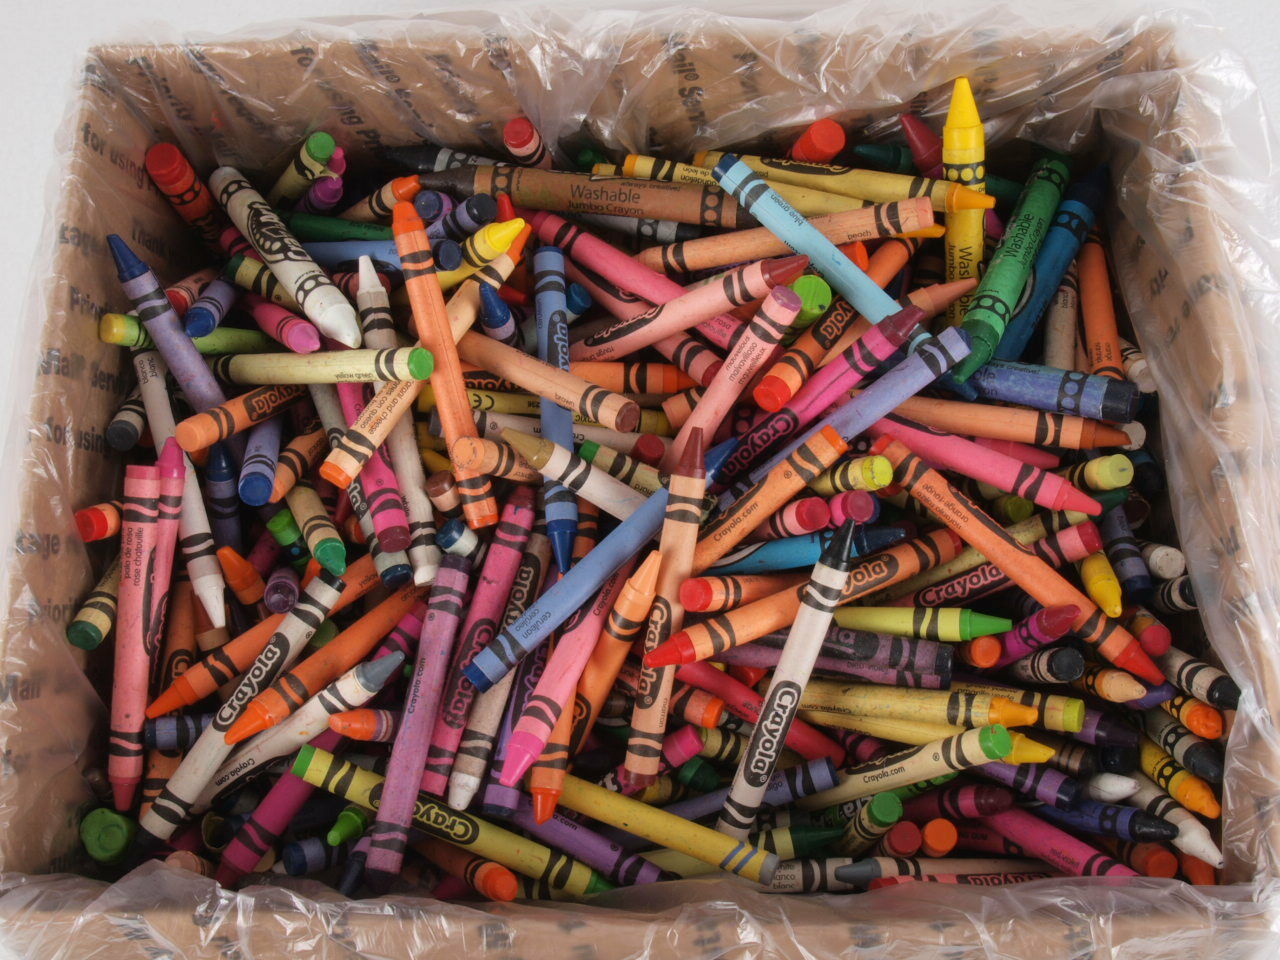 Used Crayon Lot 7 Pounds Mixed Colors Brands Crayola Crazy Art Crafts Homeschool